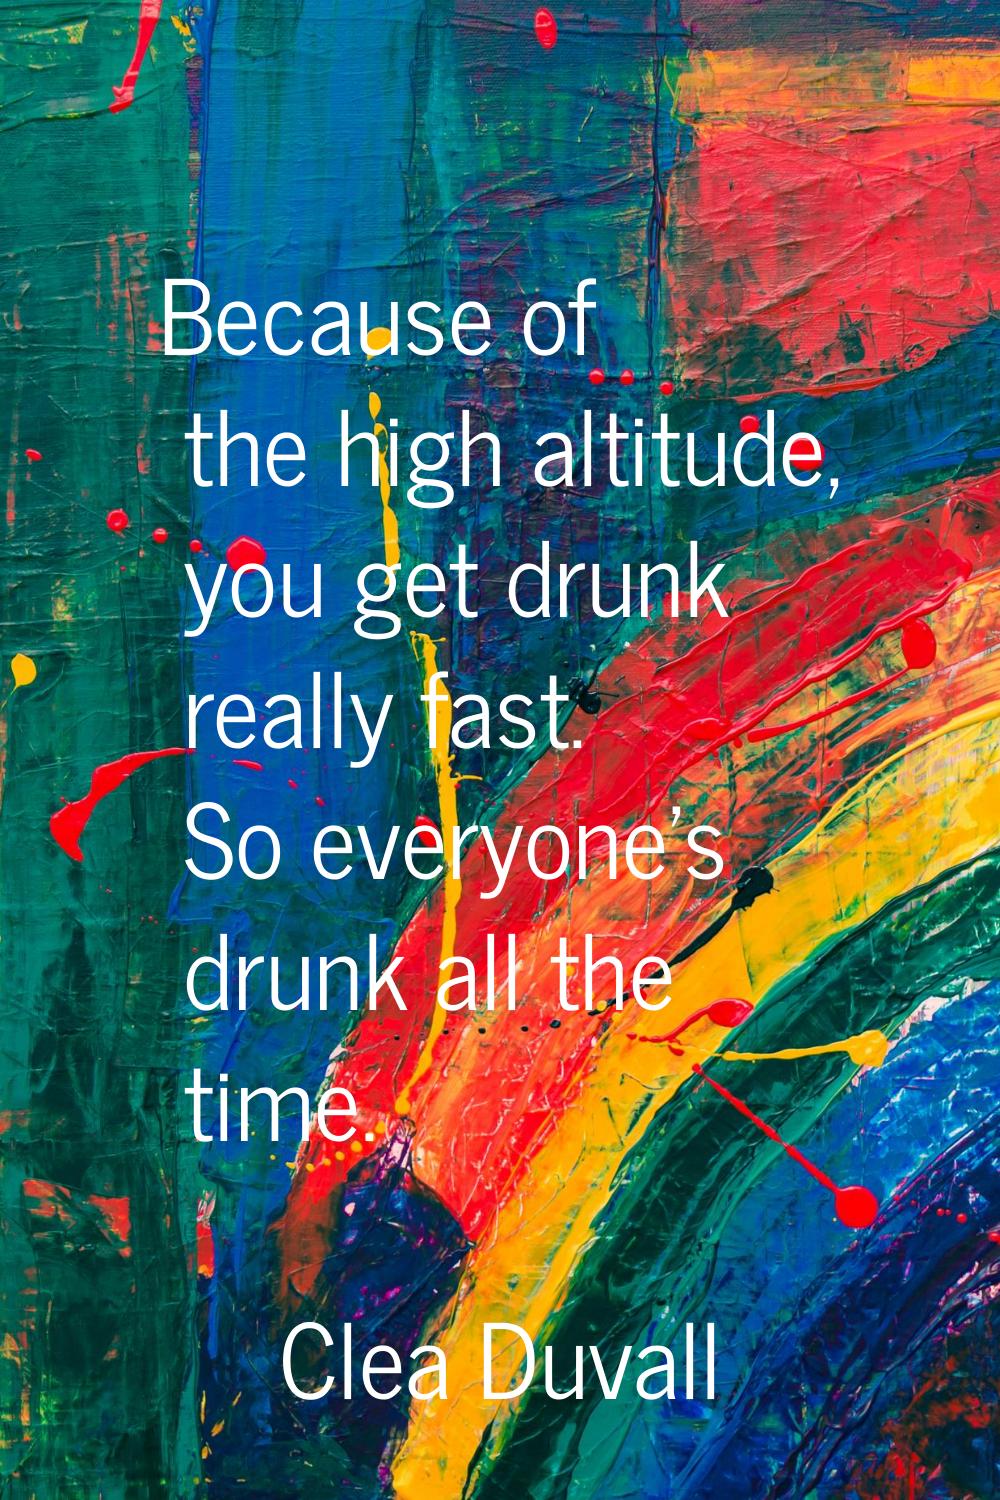 Because of the high altitude, you get drunk really fast. So everyone's drunk all the time.